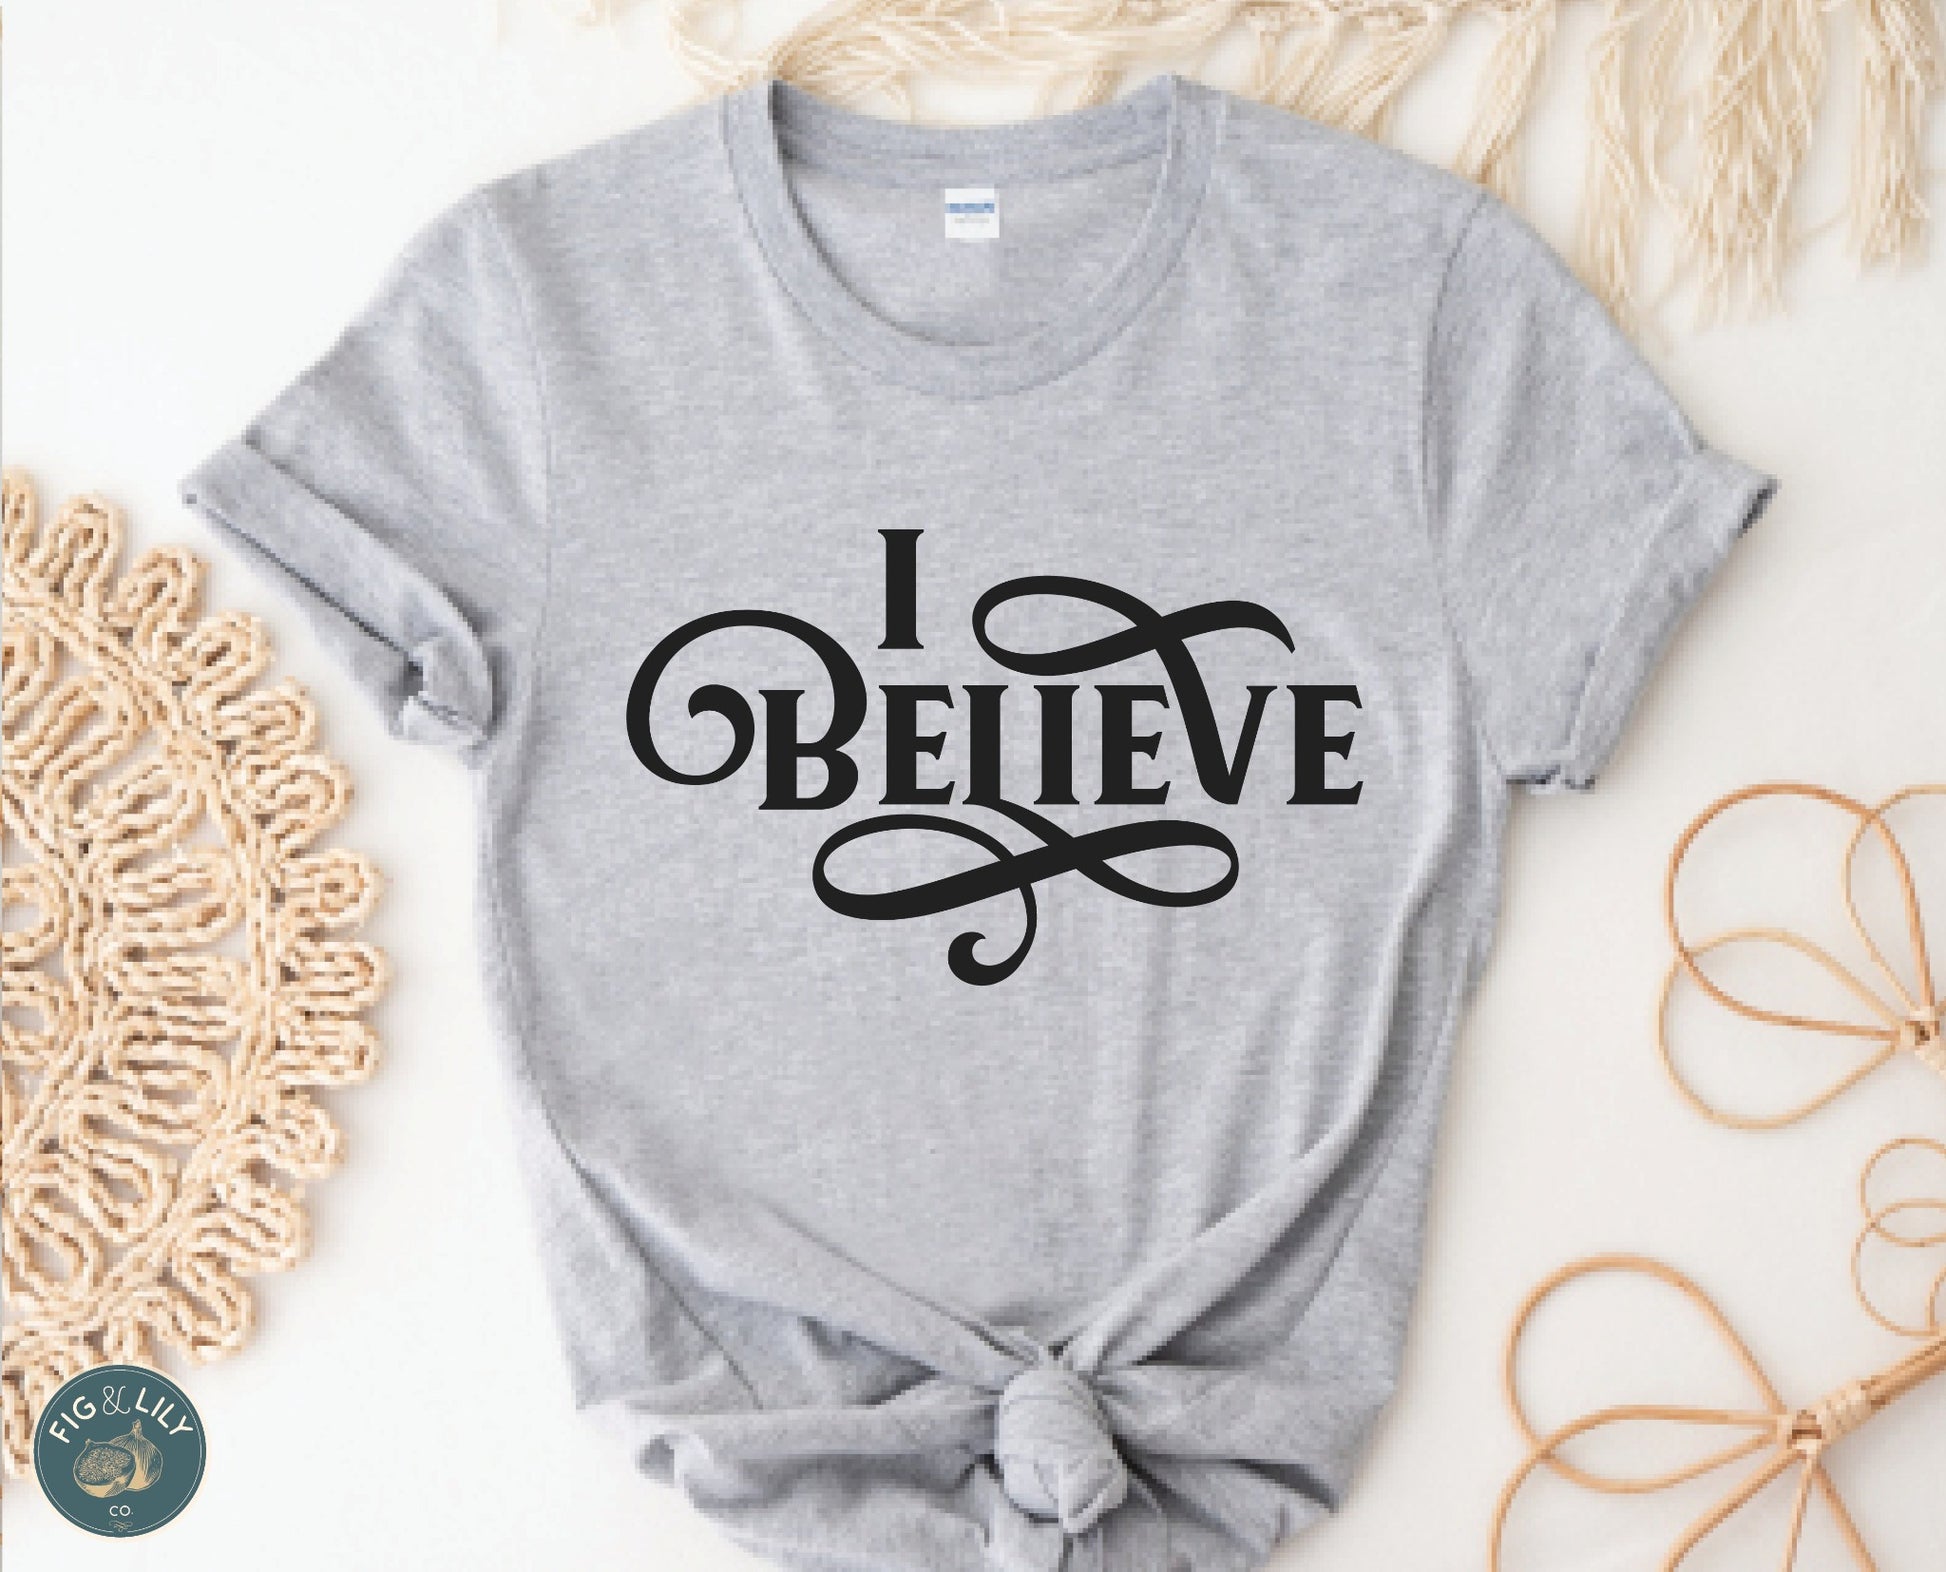 I Believe Swirl Christian aesthetic Jesus believer t-shirt design printed in black on soft heather gray tee for women, great gift for her